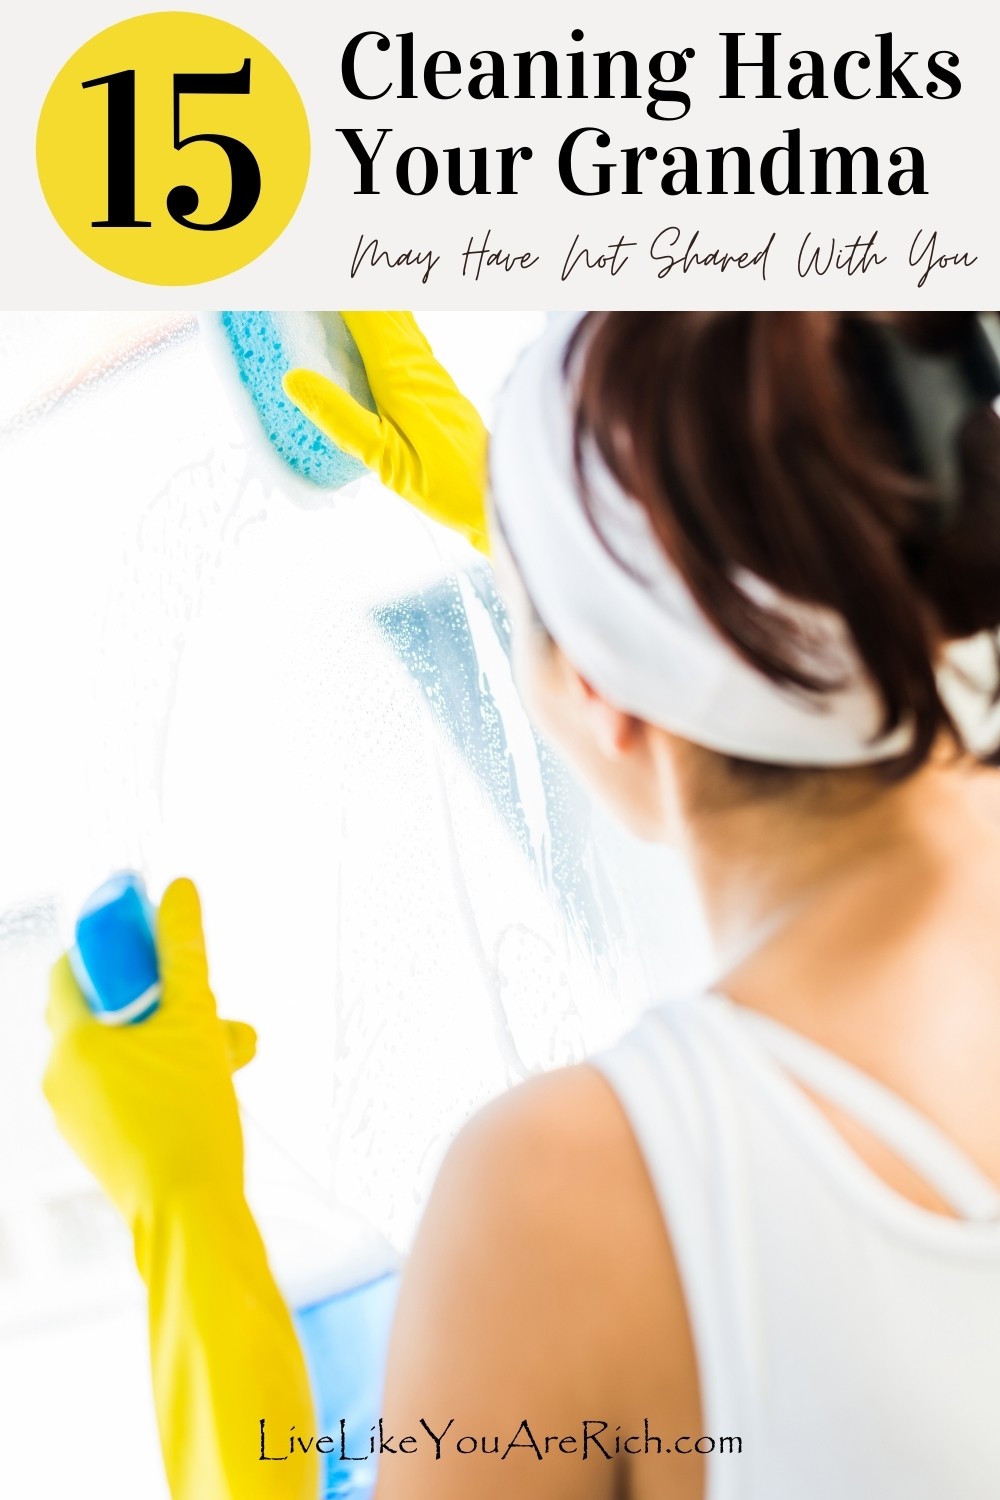 Learn time-tested fantastic cleaning methods for your house from these 15 Cleaning Hacks your Grandma May Have Not Shared With You. 